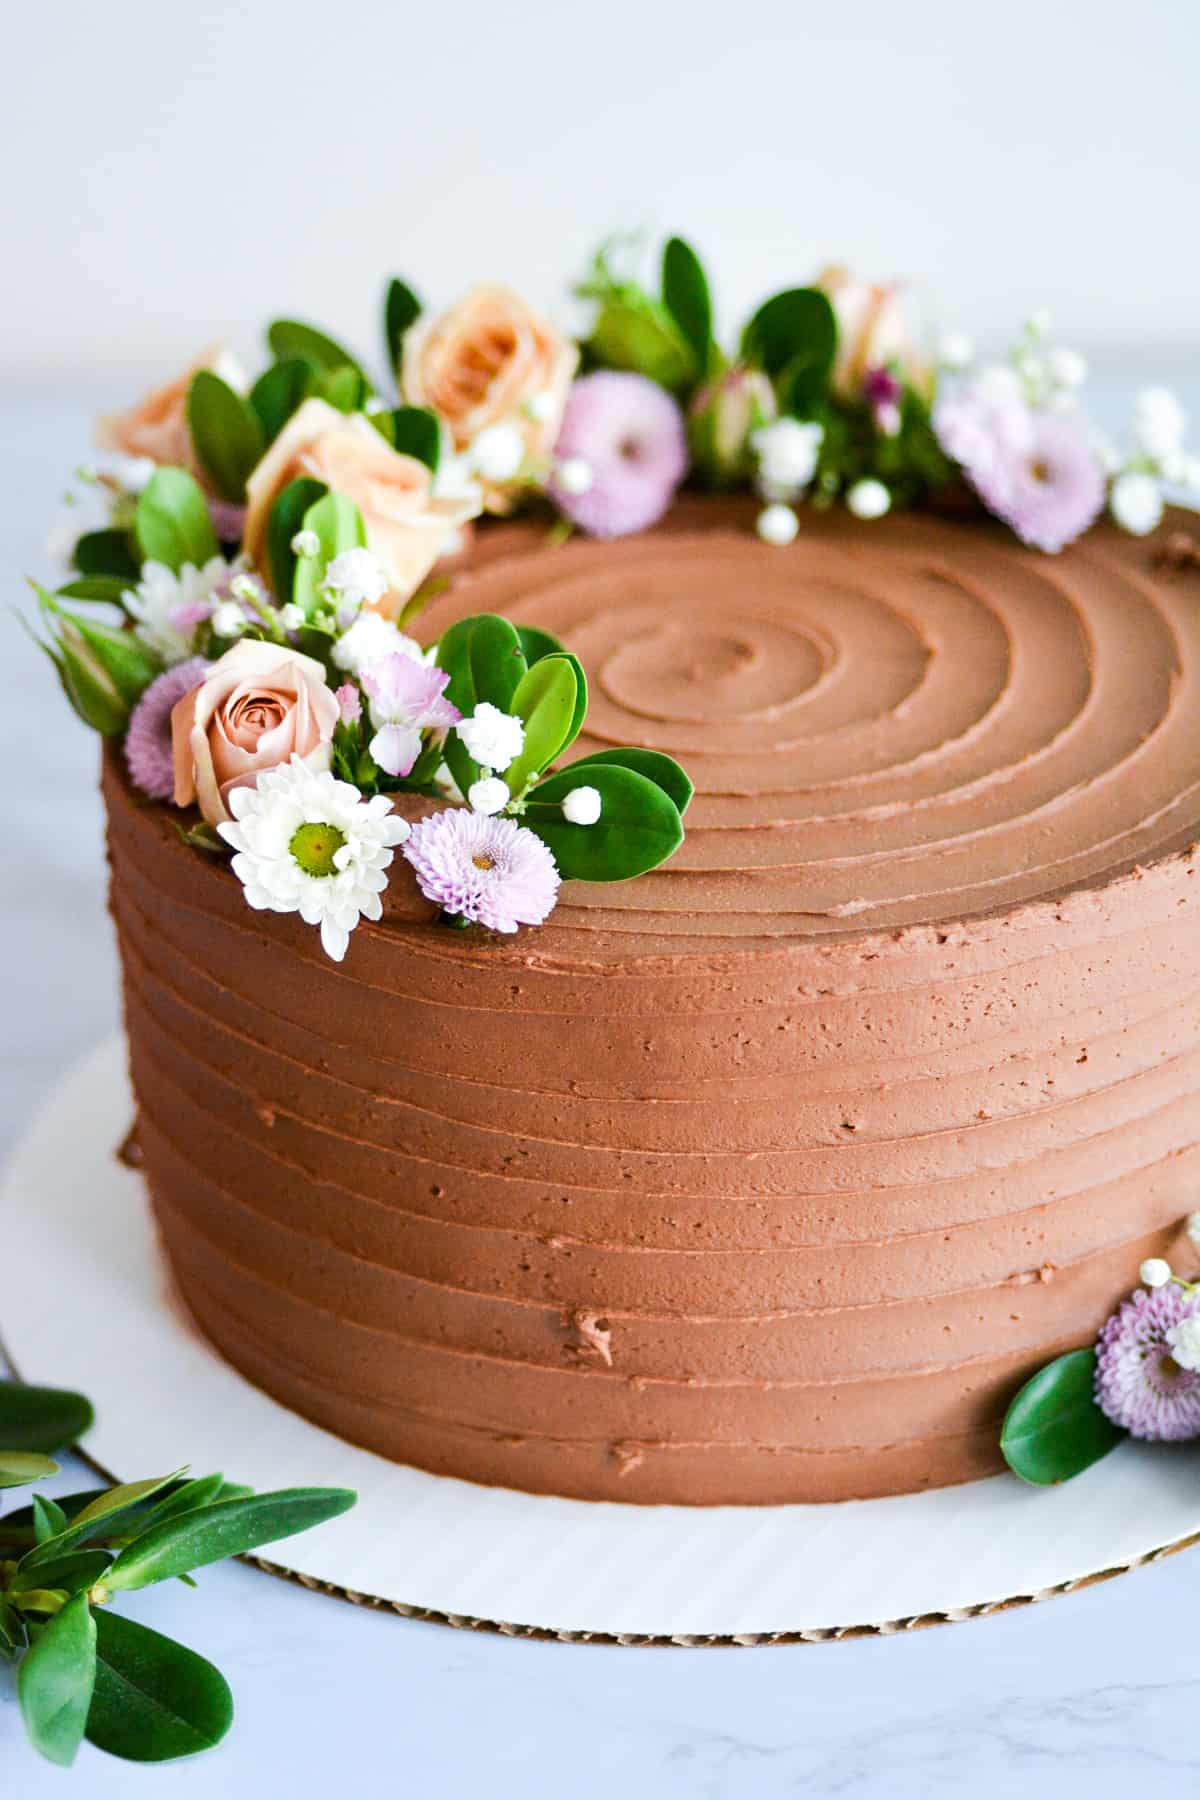 cake frosted with vegan chocolate icing and decorated with purple flowers.